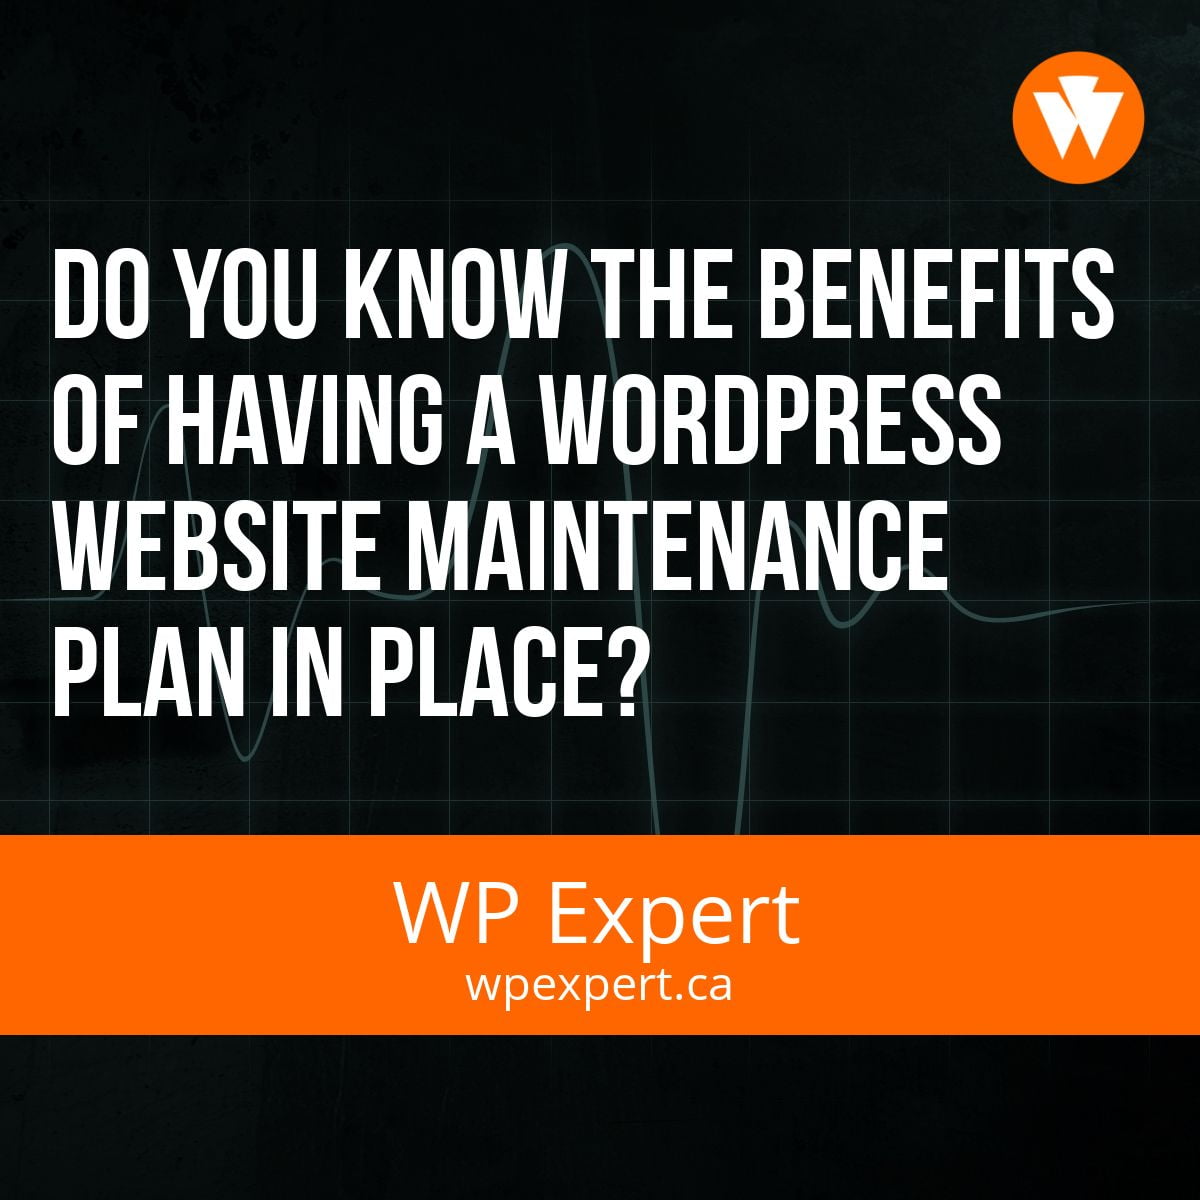 Do you know the benefits of Having a WordPress Website Maintenance Plan in Place